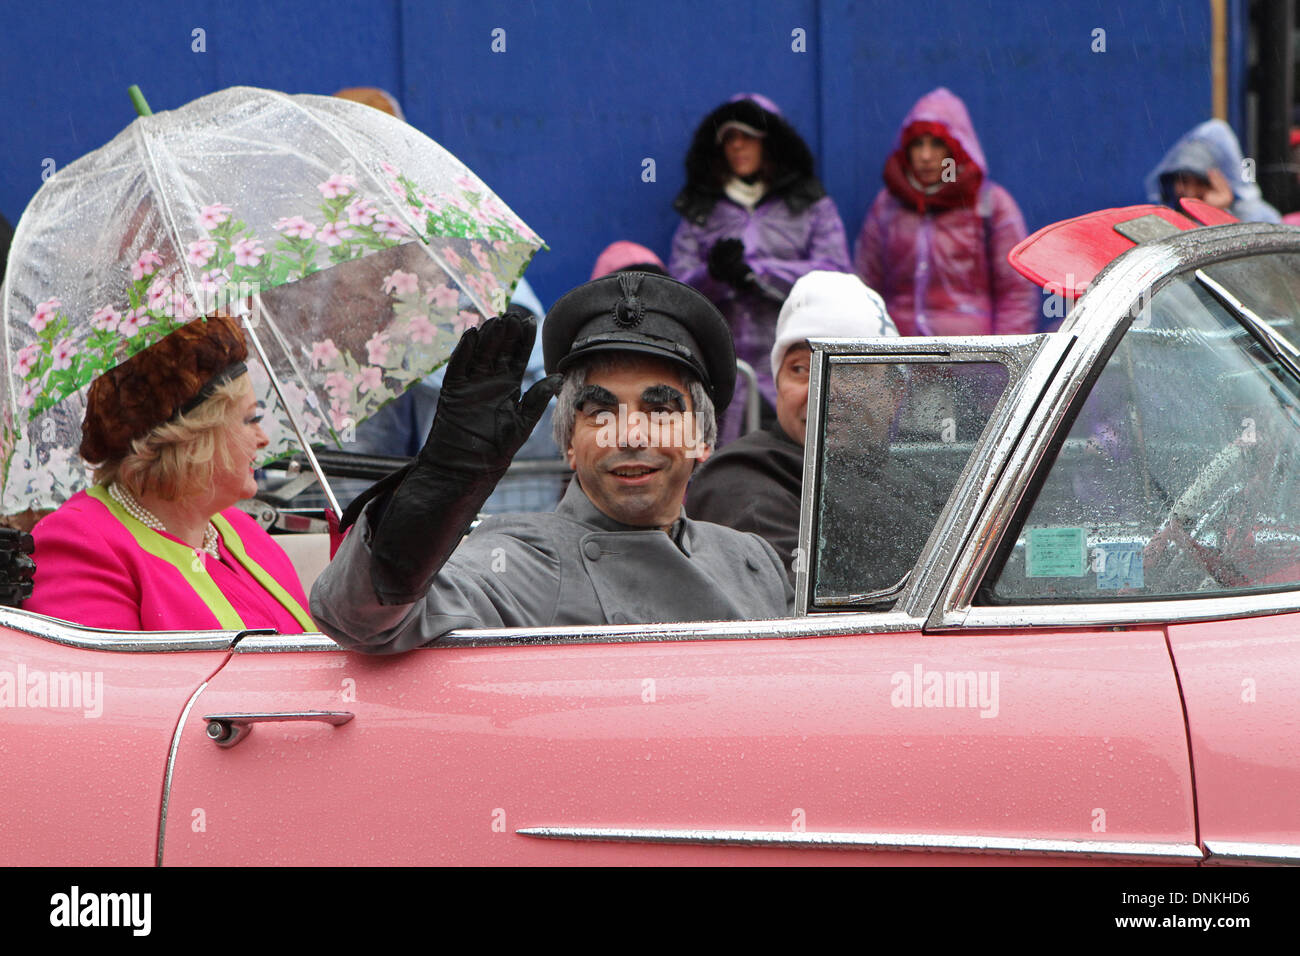 London,UK,1st January 2014,Lady Penelope from thunderbirds at the London's New Year's Day Parade 2014 Credit: Keith Larby/Alamy Live News Stock Photo